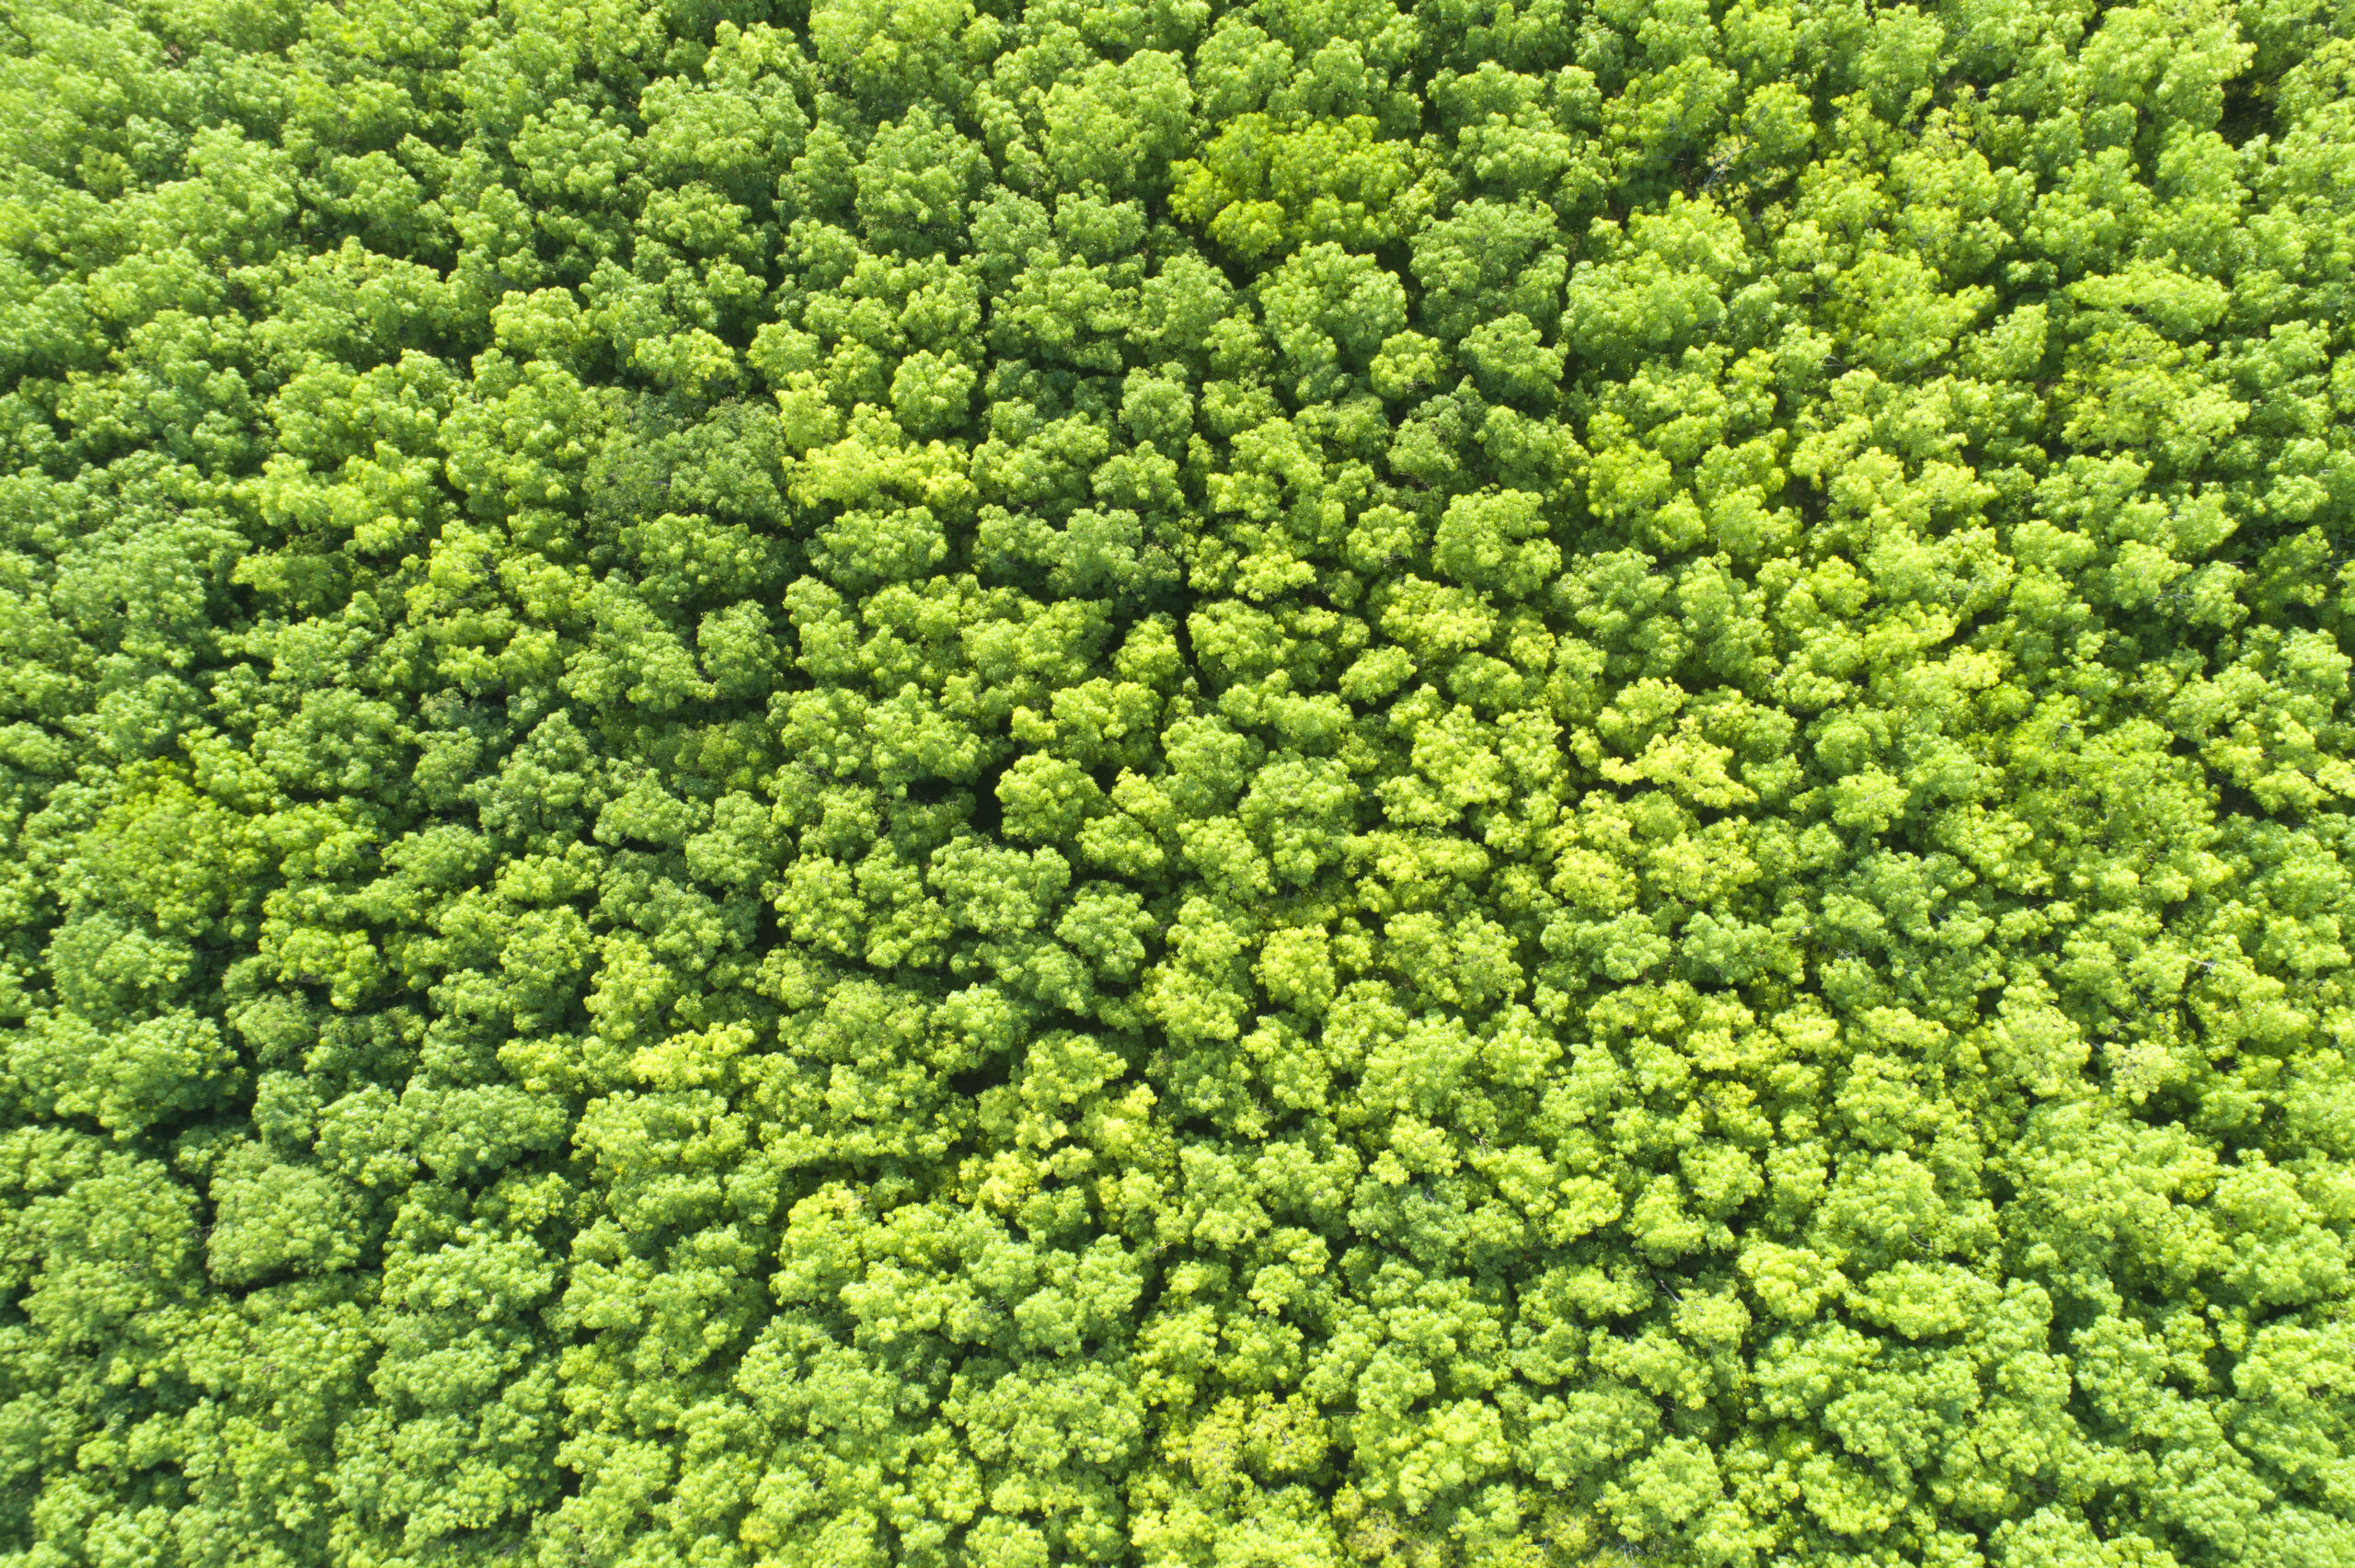 Rubber Tree Plantation from above, Aerial View